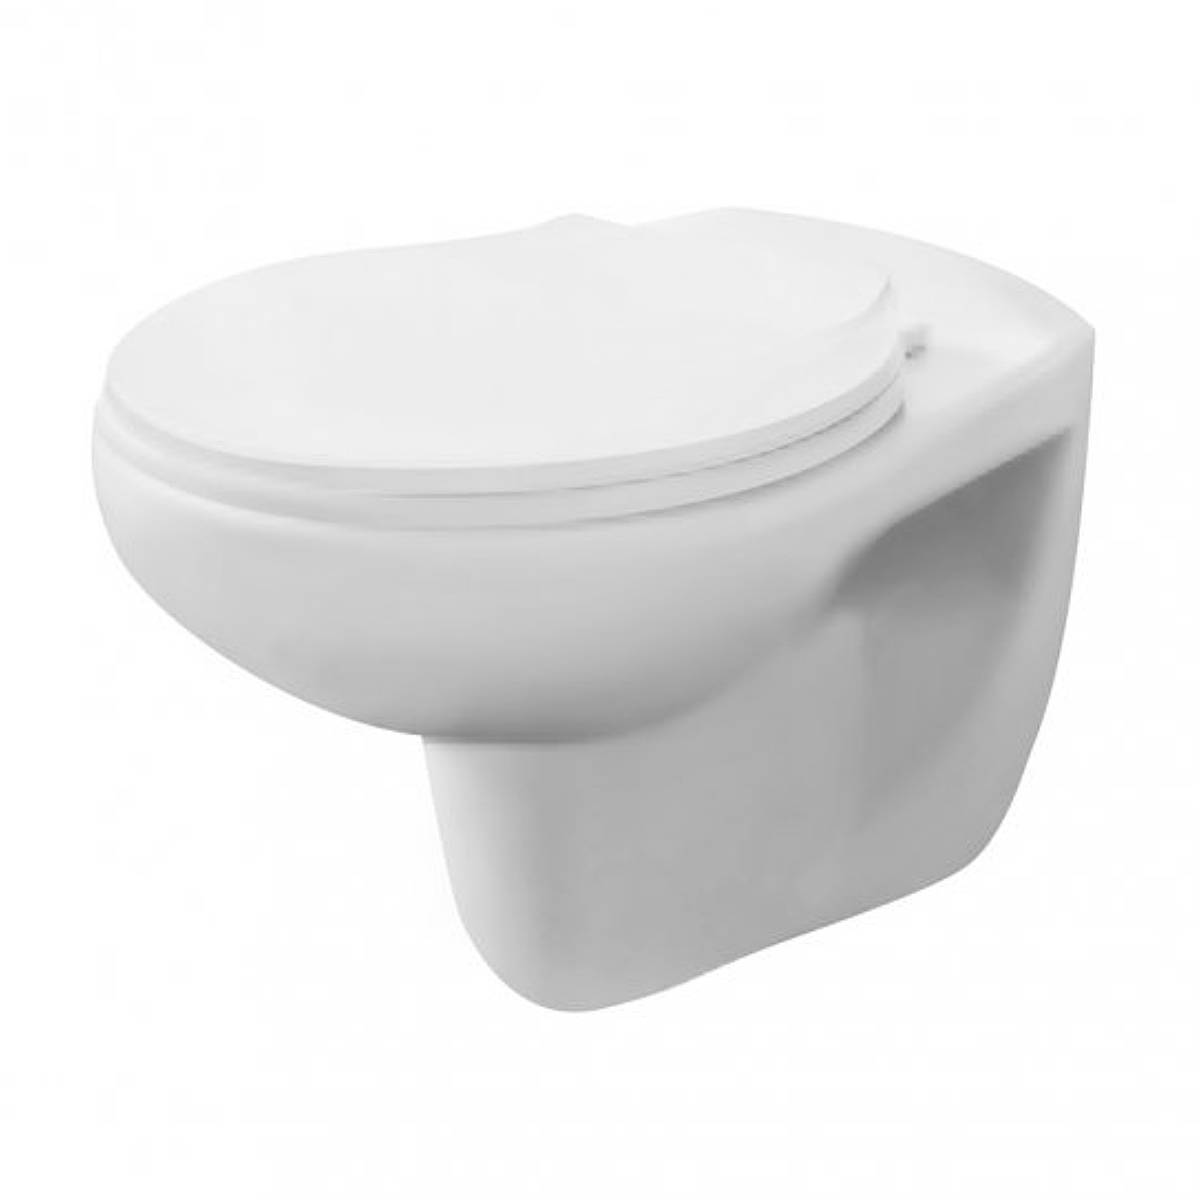 Nuie Melbourne Wall Hung Toilet & Standard Toilet Seat (5944)